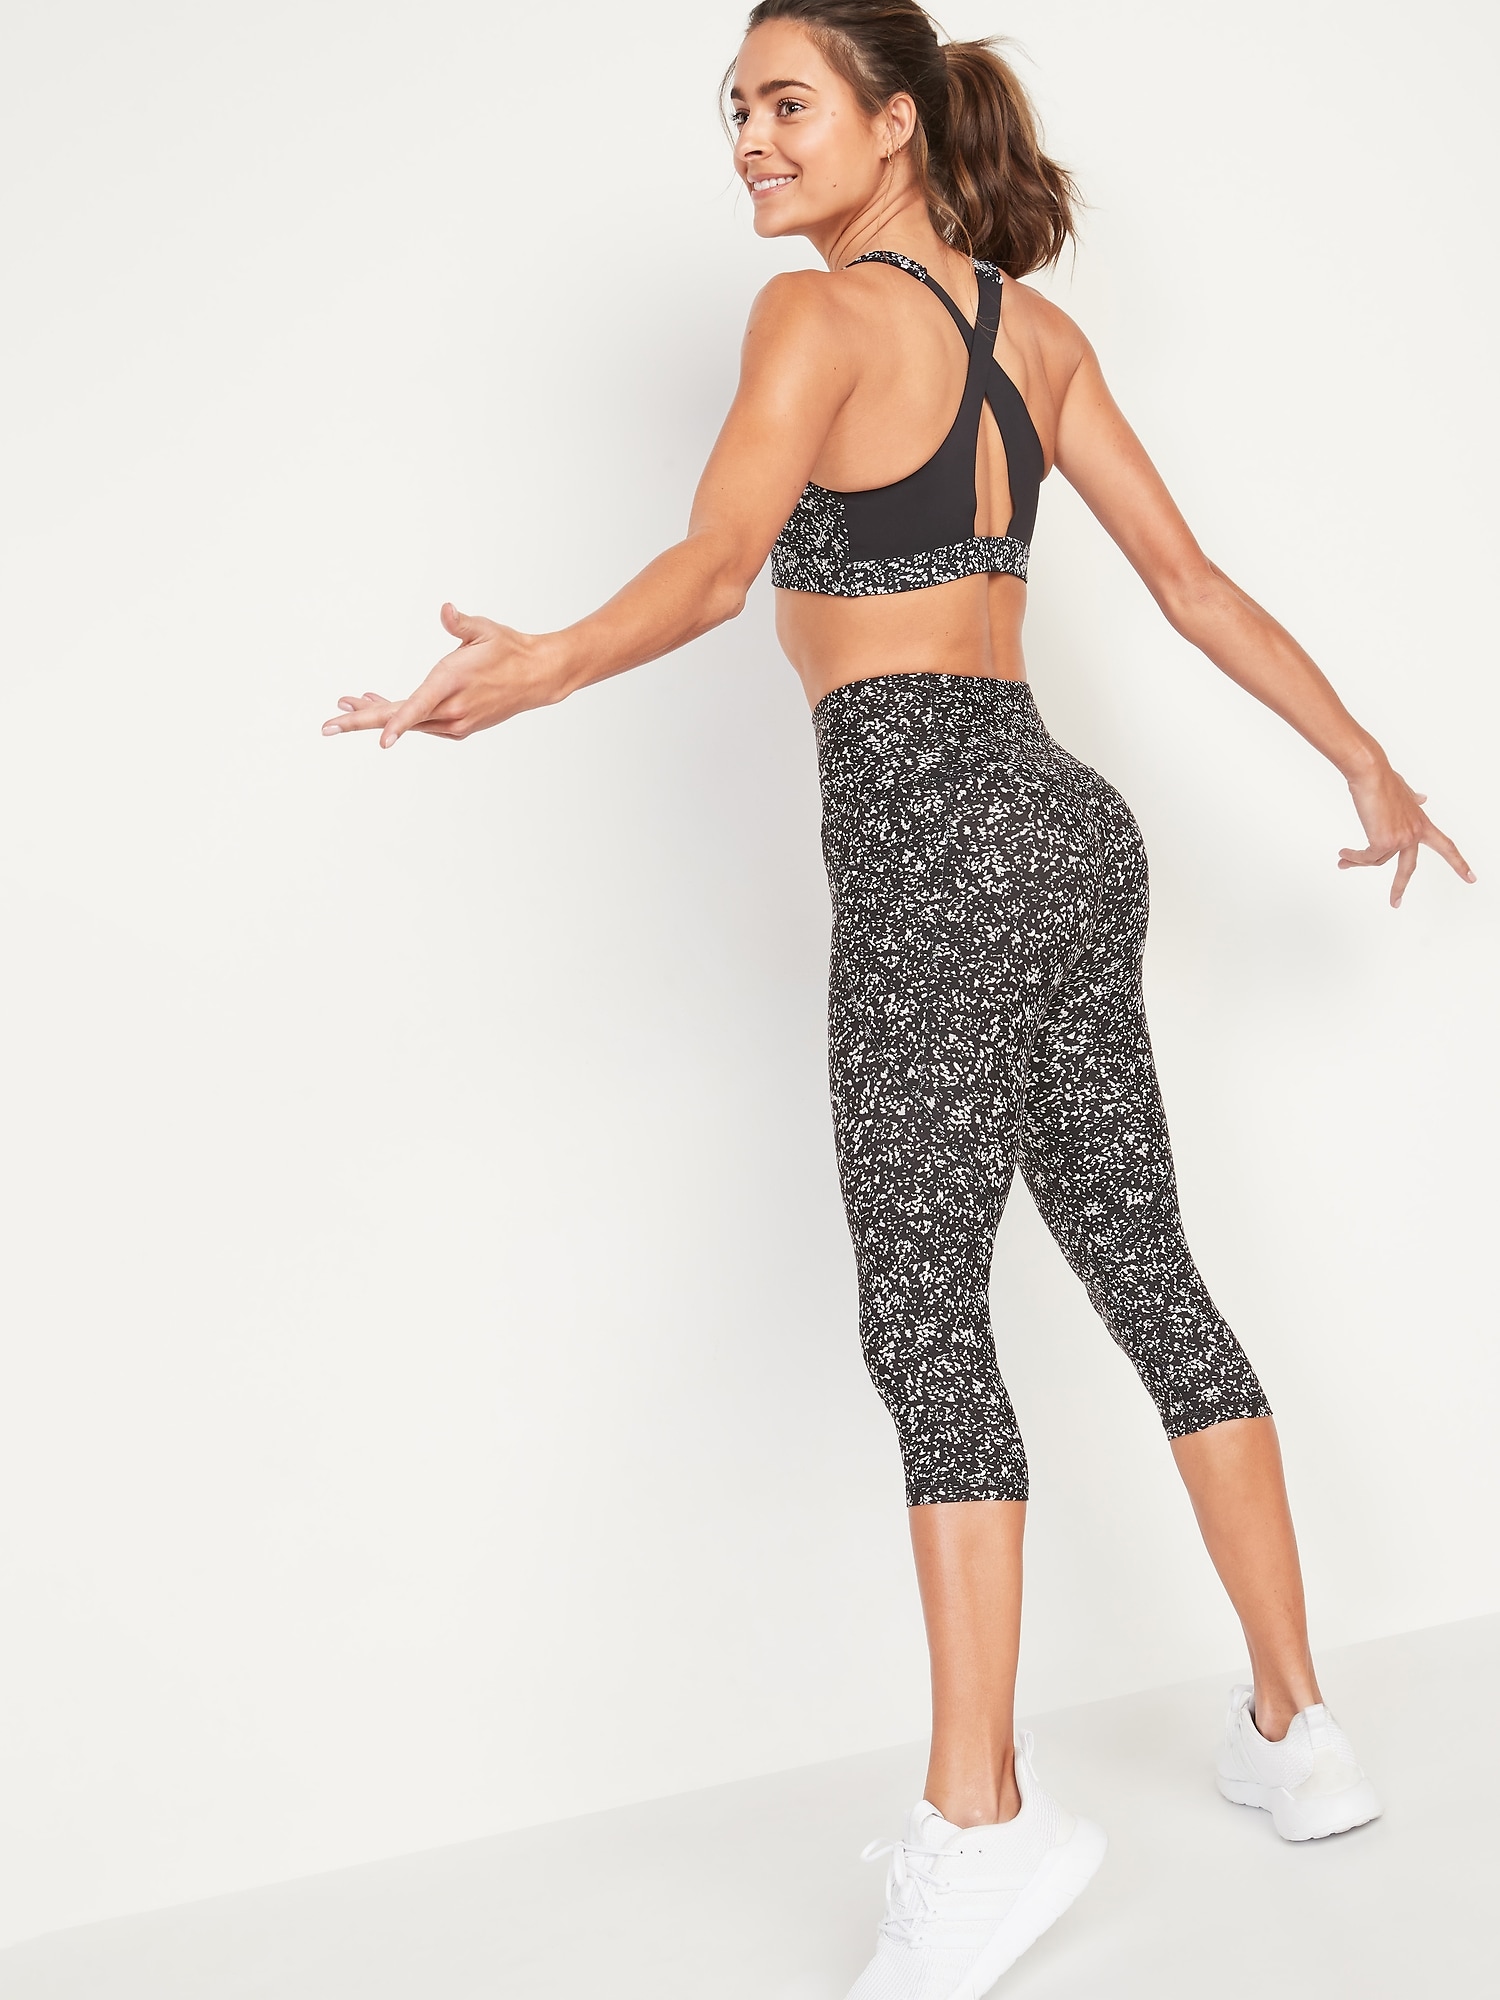 Finally—A Patterned Sports Bra+Leggings Combo That's Actually